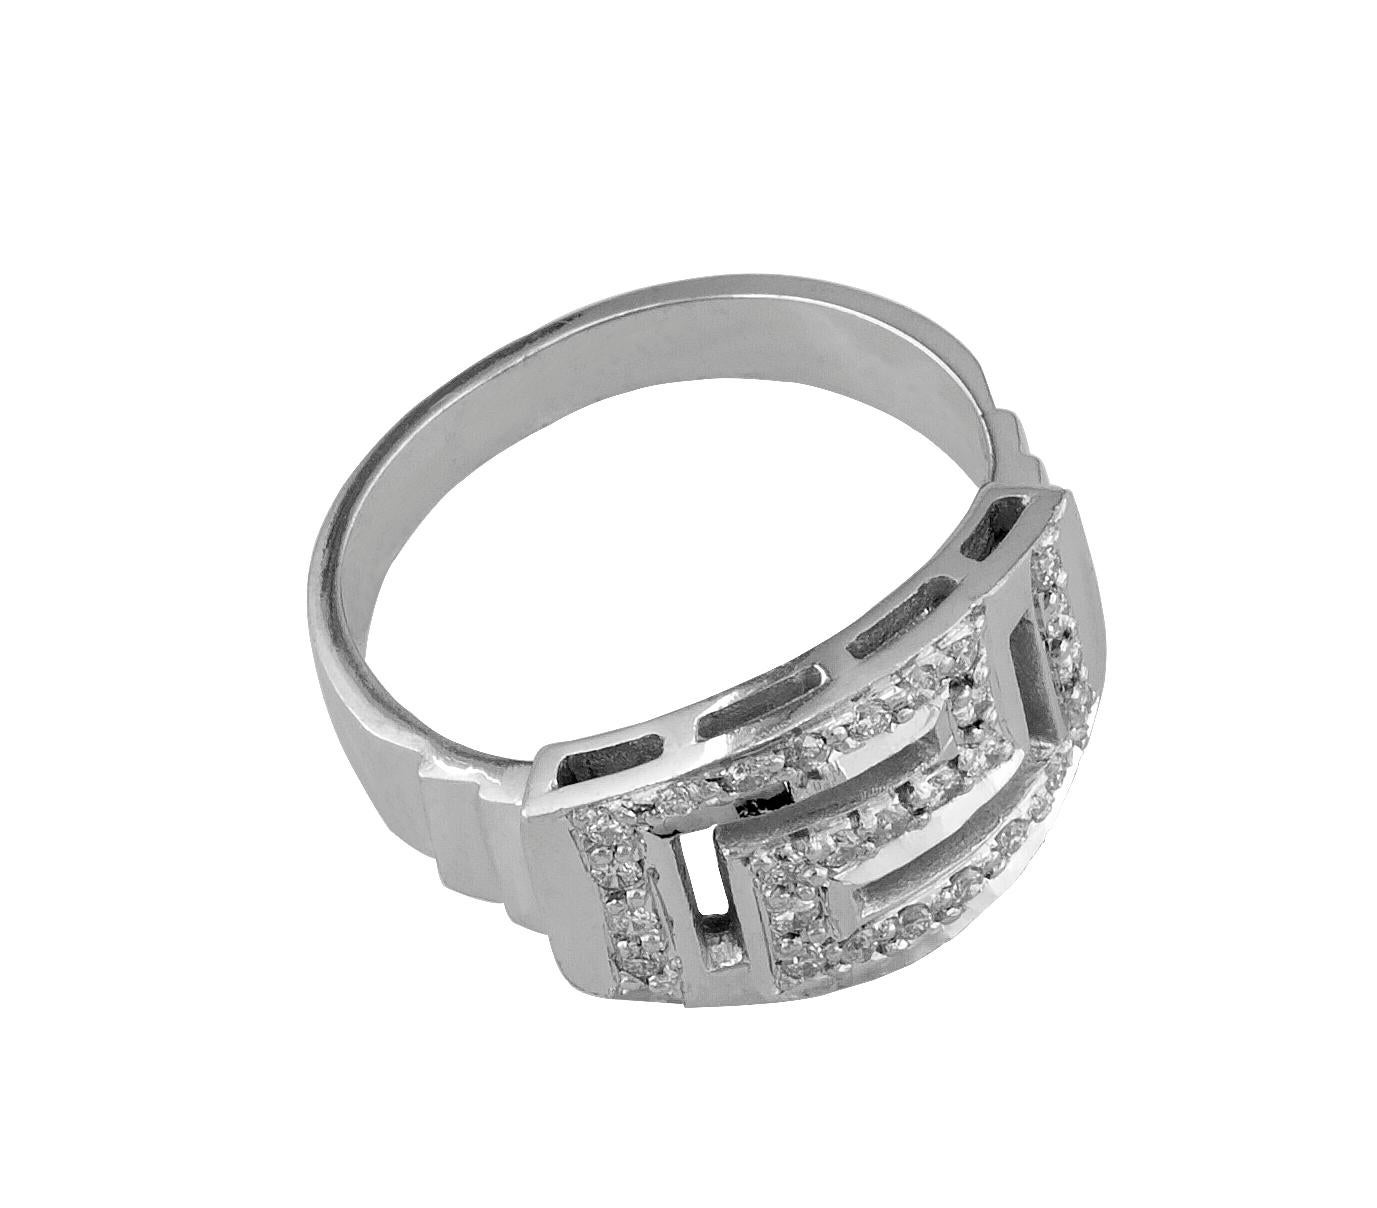 S.Georgios designer 18 Karat White Gold Ring featuring the Greek Key design symbolizing eternity. This gorgeous band ring has 27 Brilliant Cut White Diamonds total weight of 0.36 Carat. The quality of the stones and workmanship is outstanding and is